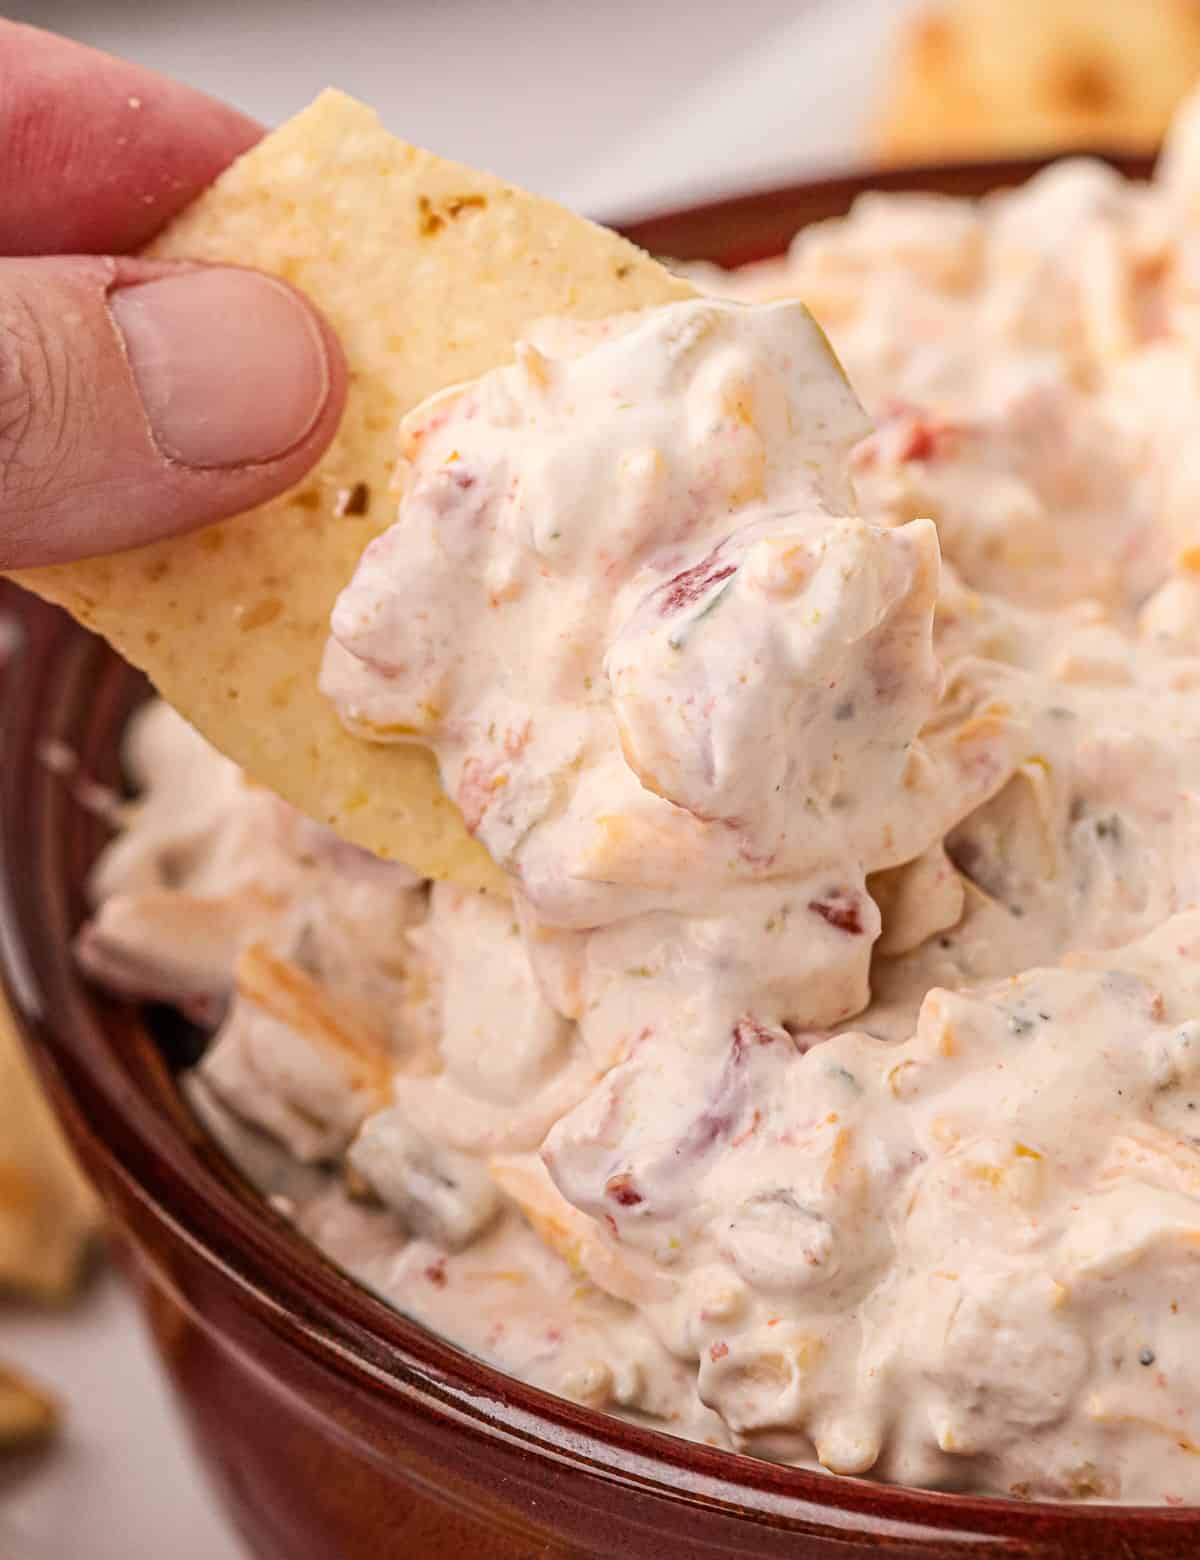 This creamy party-ready boat dip is a fun twist on the TikTok classic. You'll only need a handful of ingredients and no fancy tools, and you'll have a cool, creamy, and ultra-flavorful ranch dip that is perfect for any party, or for taking to the pool, lake, or beach!